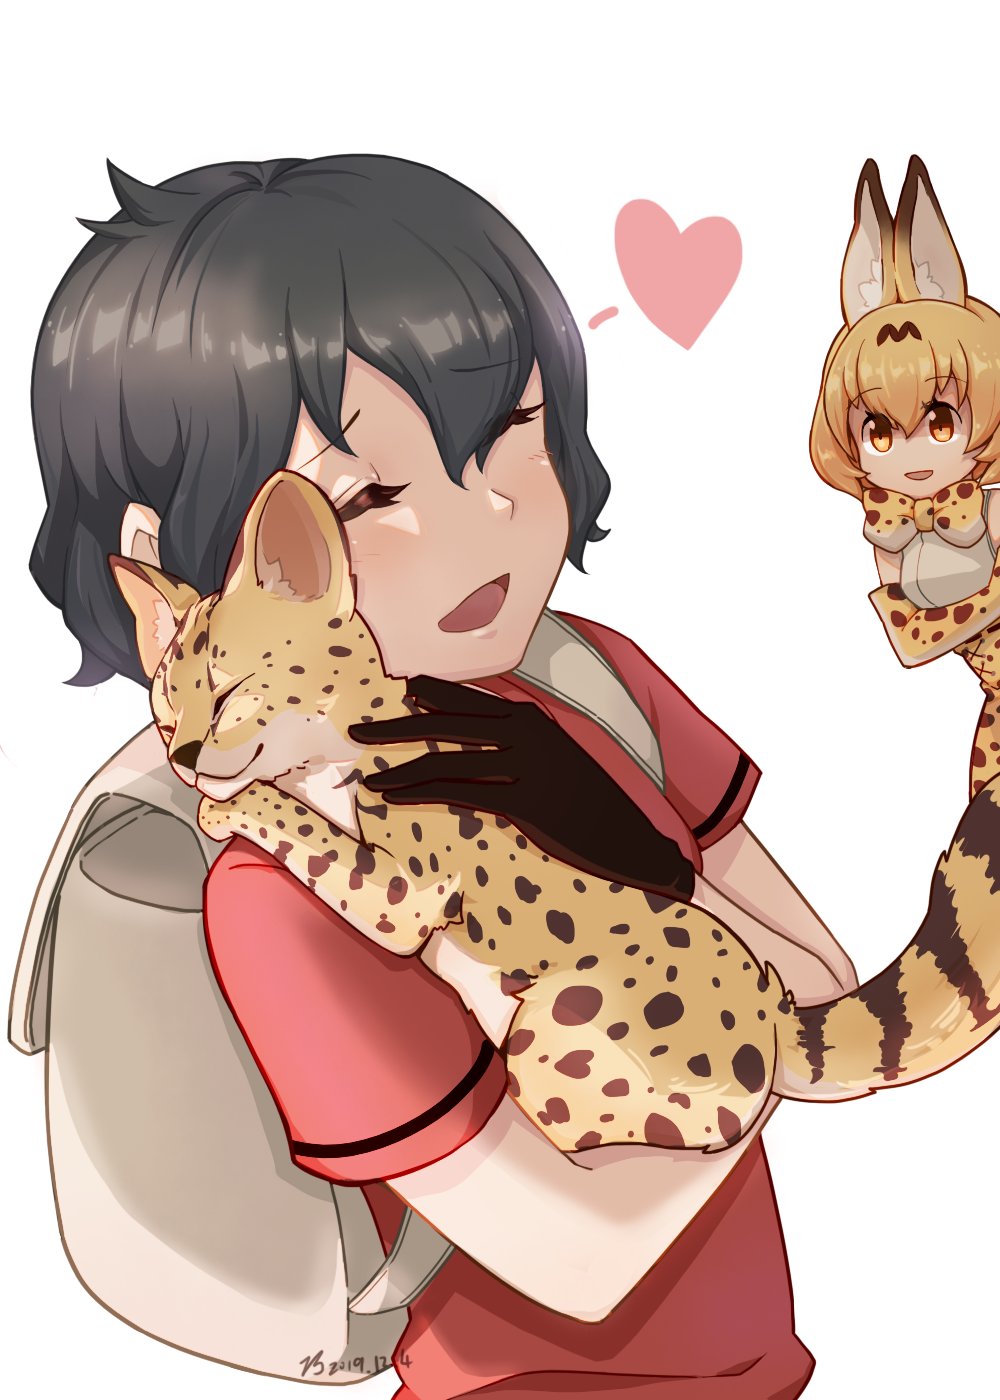 2girls animal_ears backpack bag bare_shoulders black_hair blonde_hair blush bow bowtie cat closed_eyes commentary_request elbow_gloves eyebrows_visible_through_hair gloves heart high-waist_skirt highres holding holding_cat kaban_(kemono_friends) kemono_friends multiple_girls natuki_takumi no_hat no_headwear print_gloves print_neckwear print_skirt red_shirt serval serval_(kemono_friends) serval_ears serval_girl serval_print serval_tail shirt short_hair short_sleeves skirt sleeveless t-shirt tail yellow_eyes